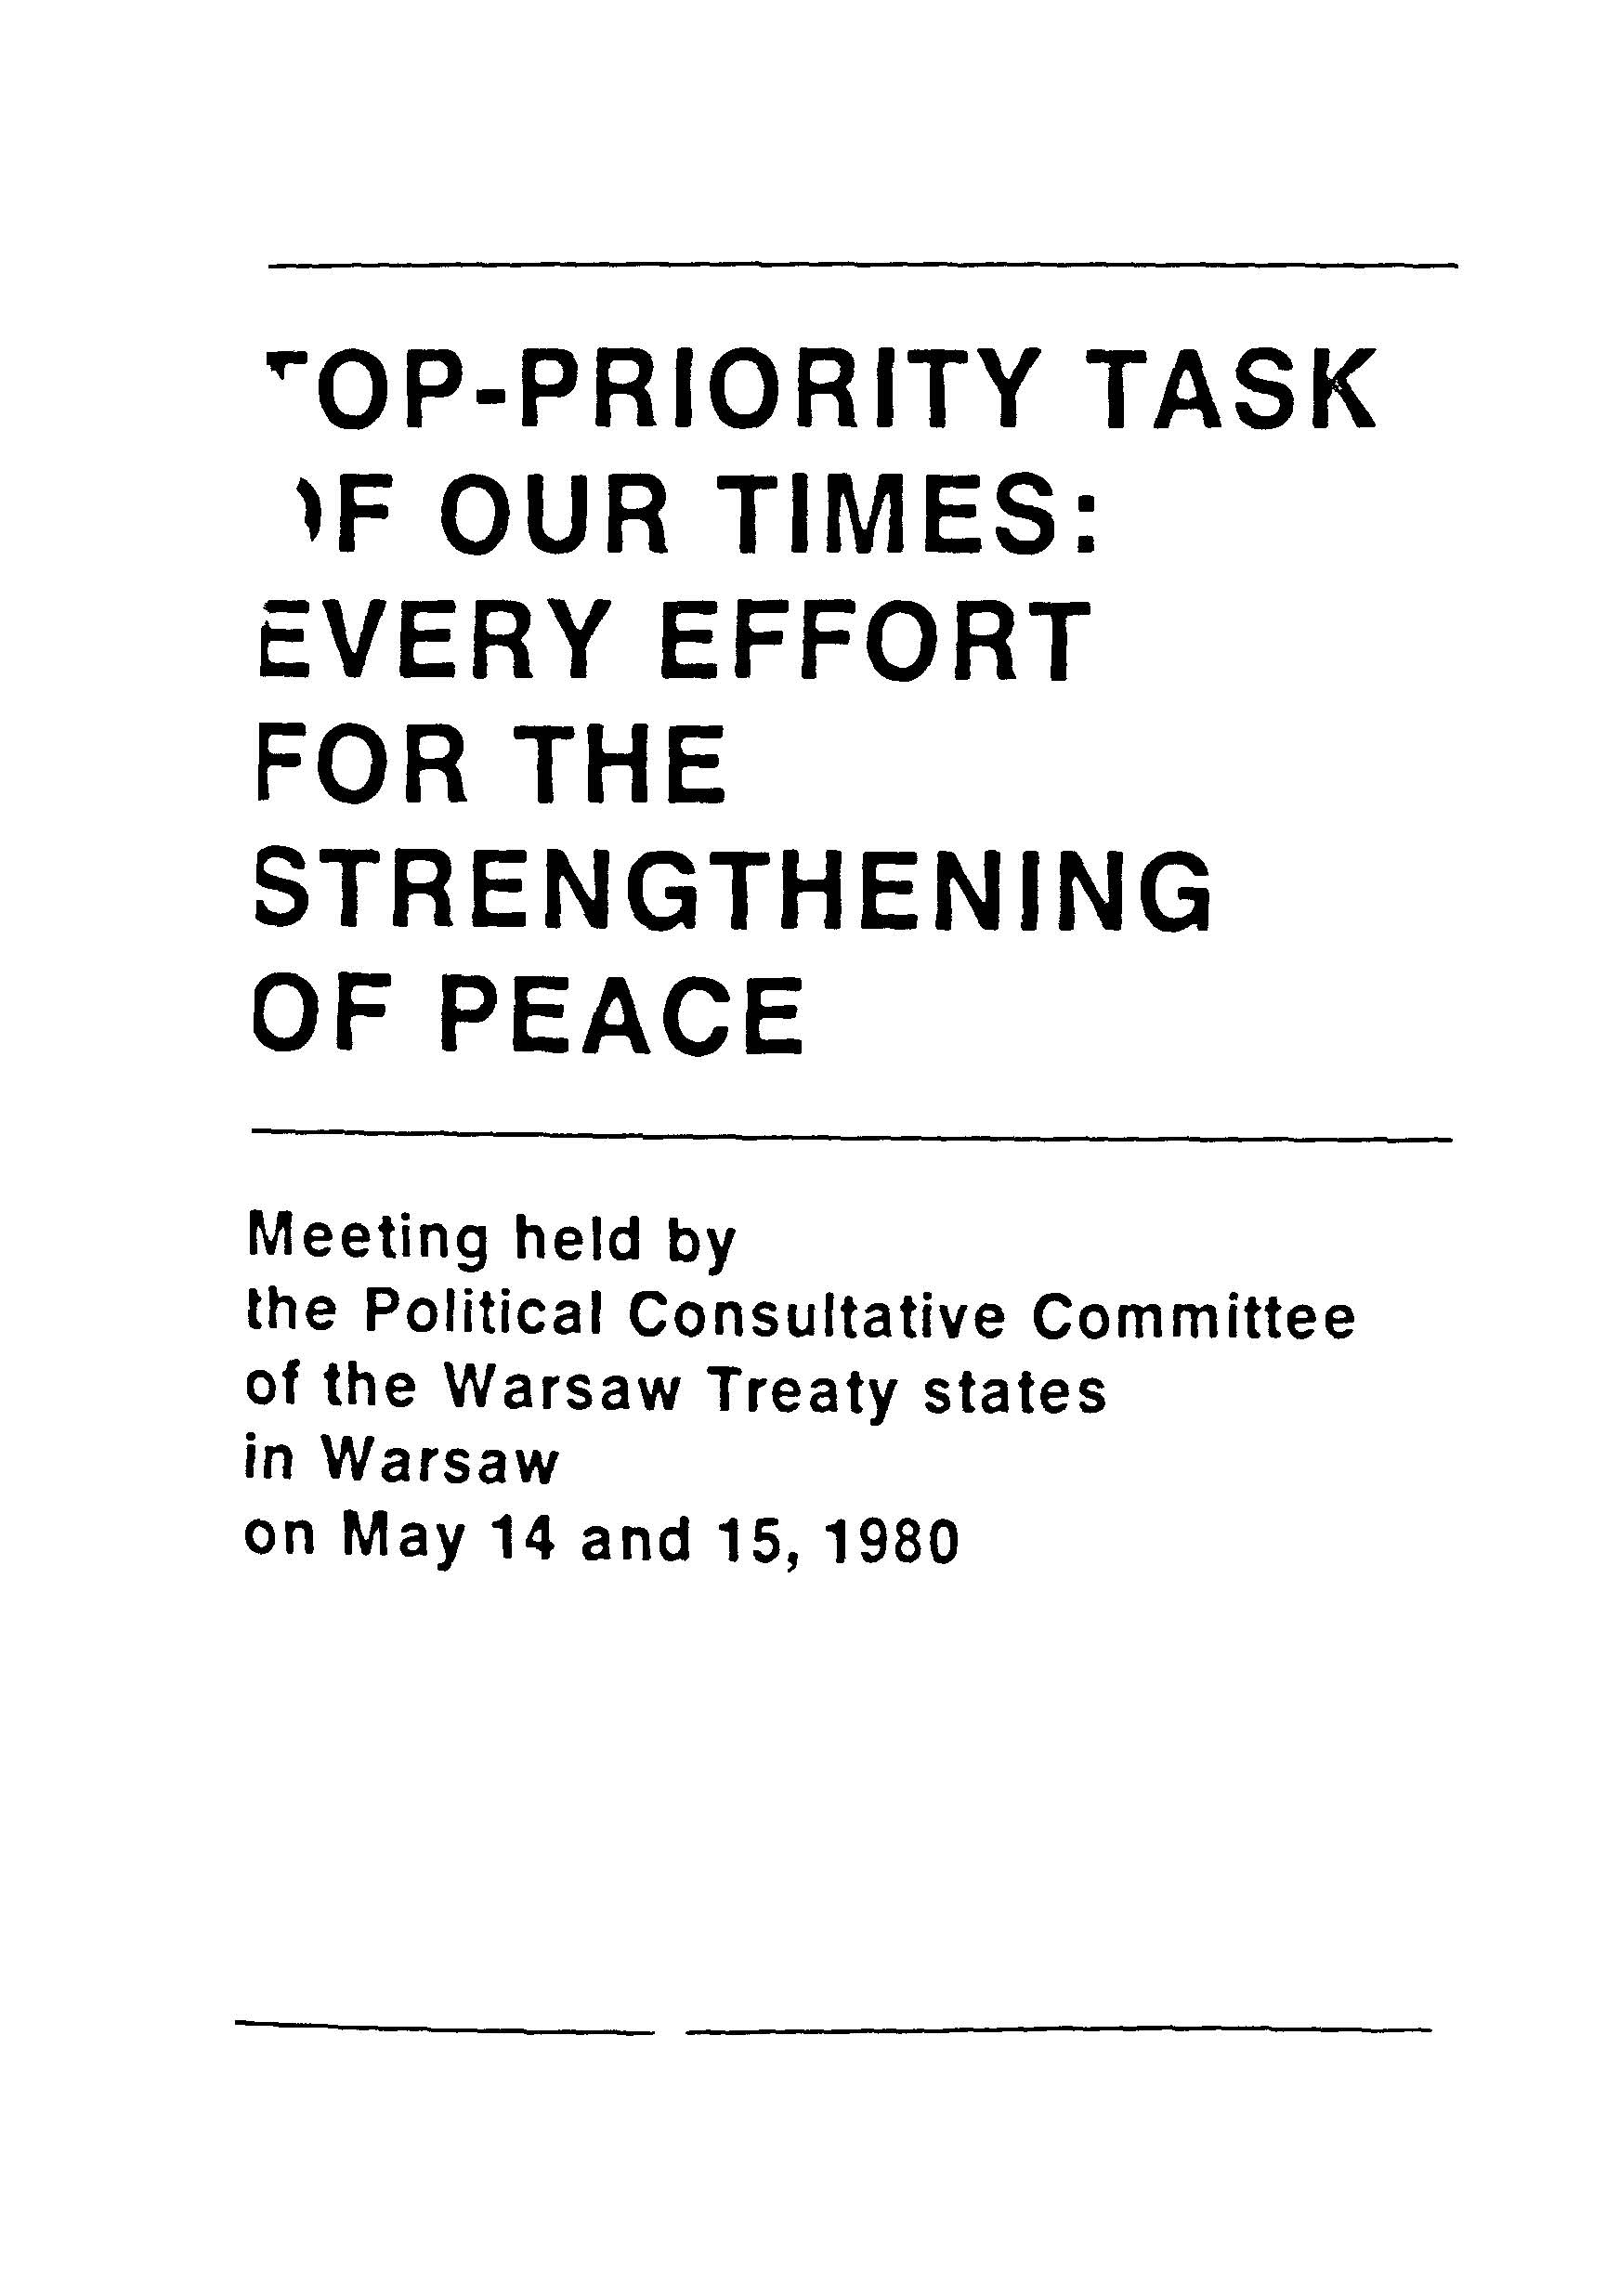 Top-priority task of our times:every effort for the strengthening of peace